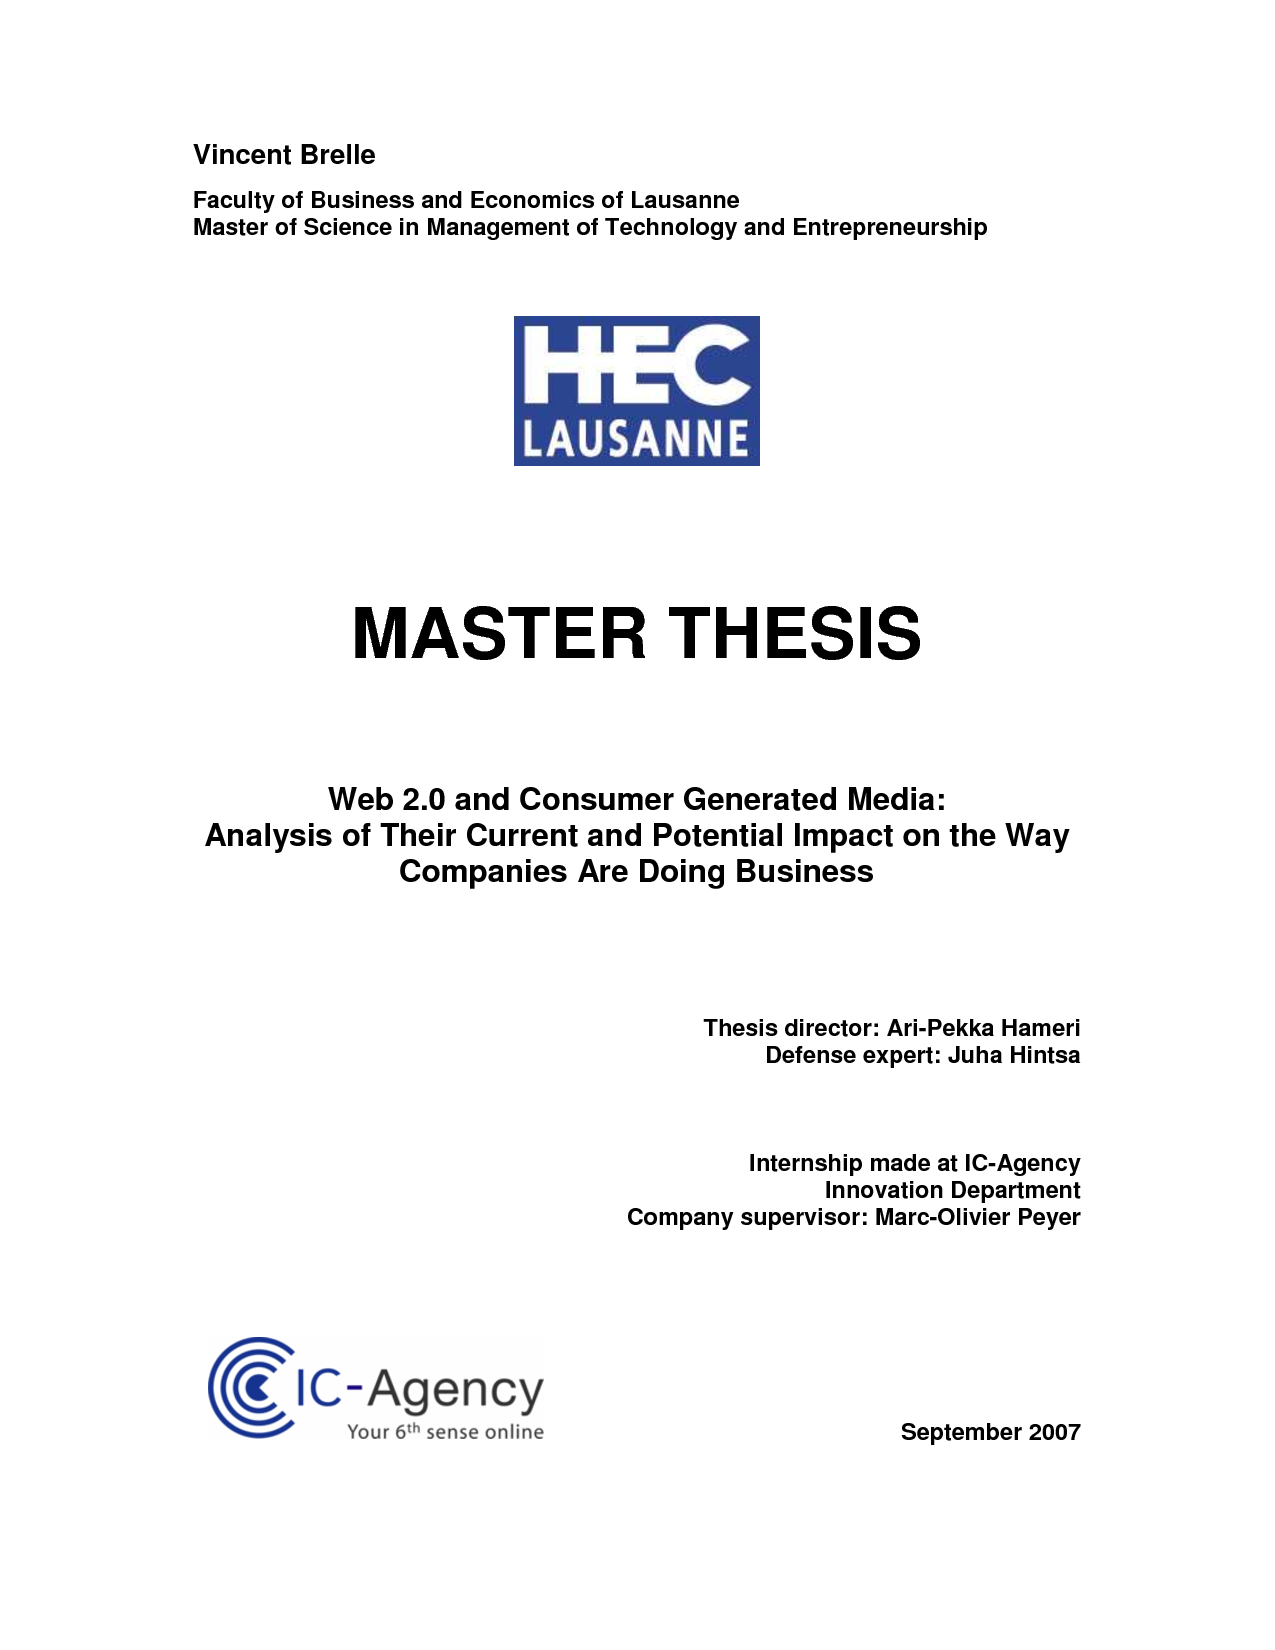 Completing a masters thesis